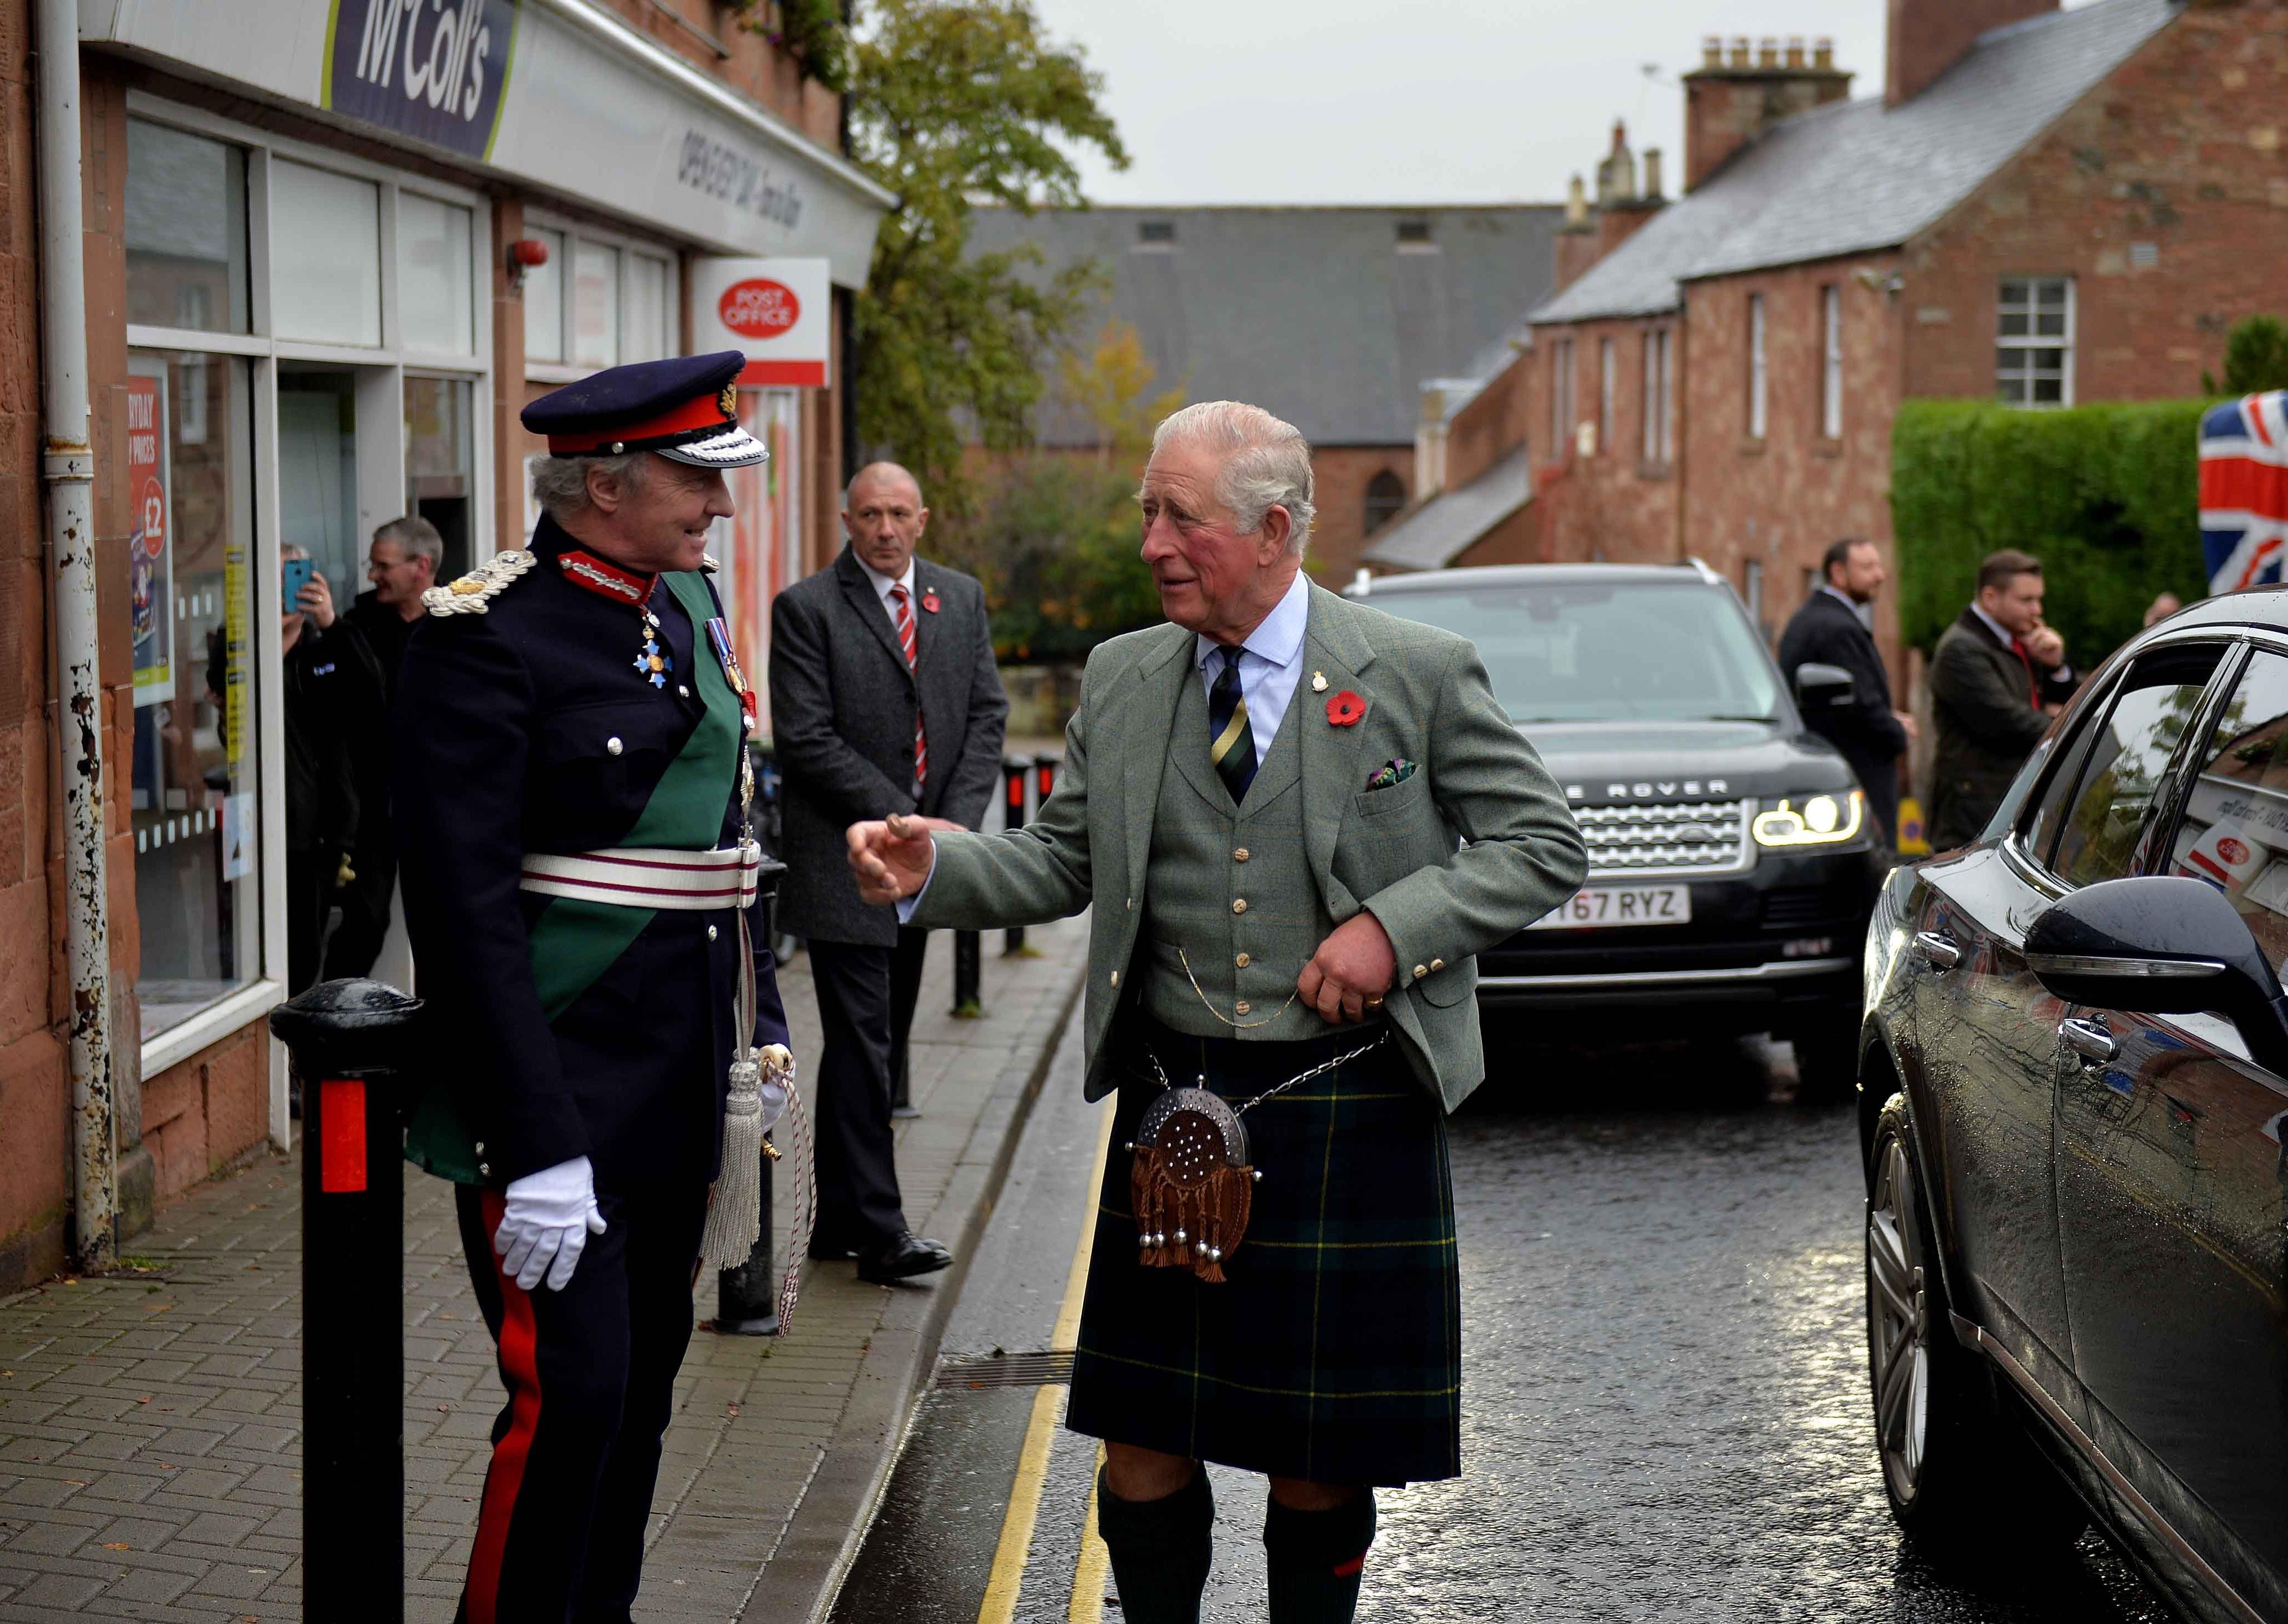 The Duke of Buccleuch welcomes the Duke of Rothesay to St Boswells.